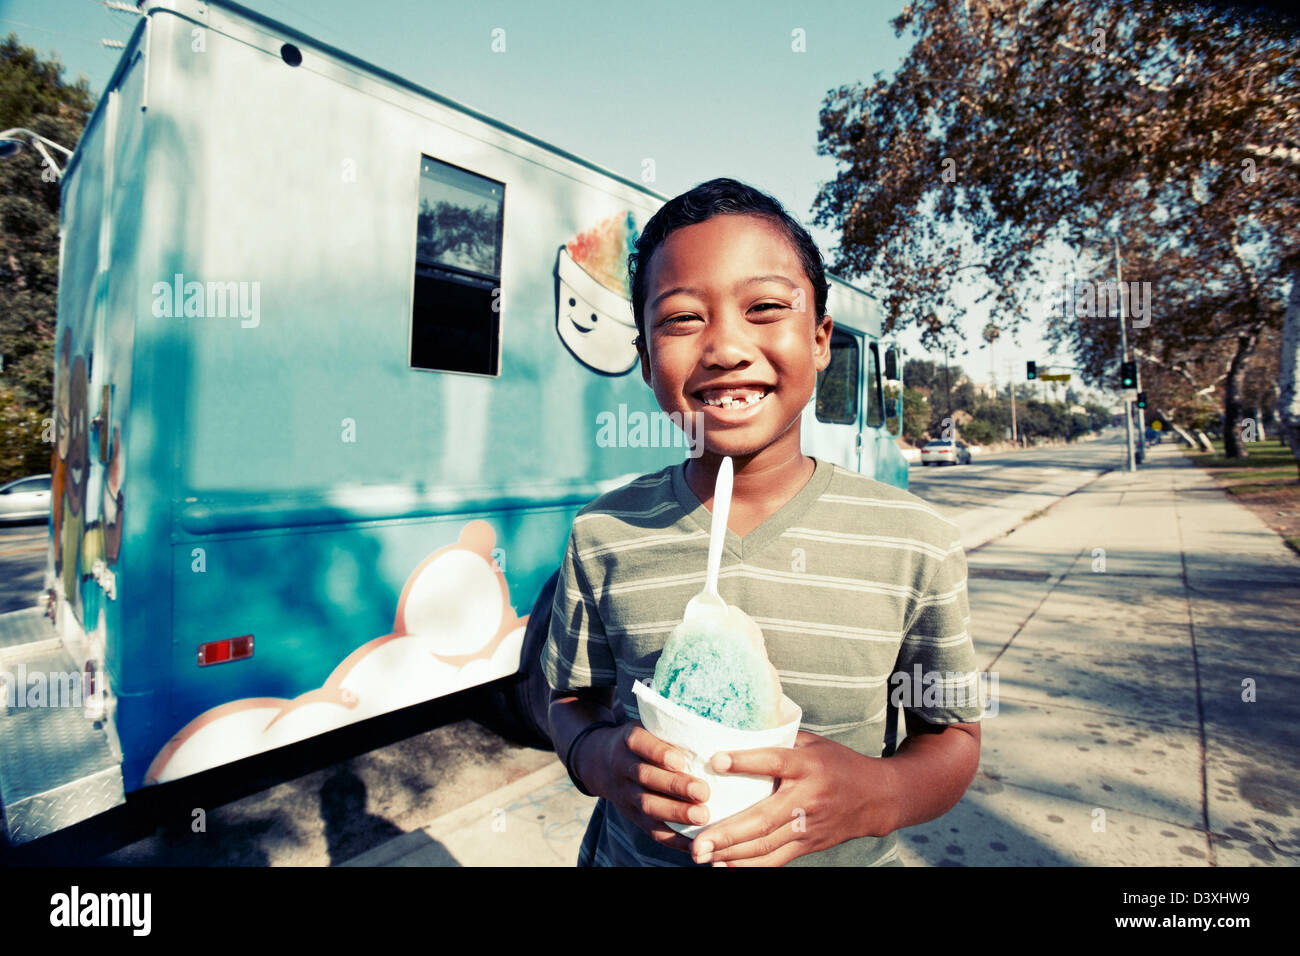 Mixed race boy eating ice cream from truck Stock Photo